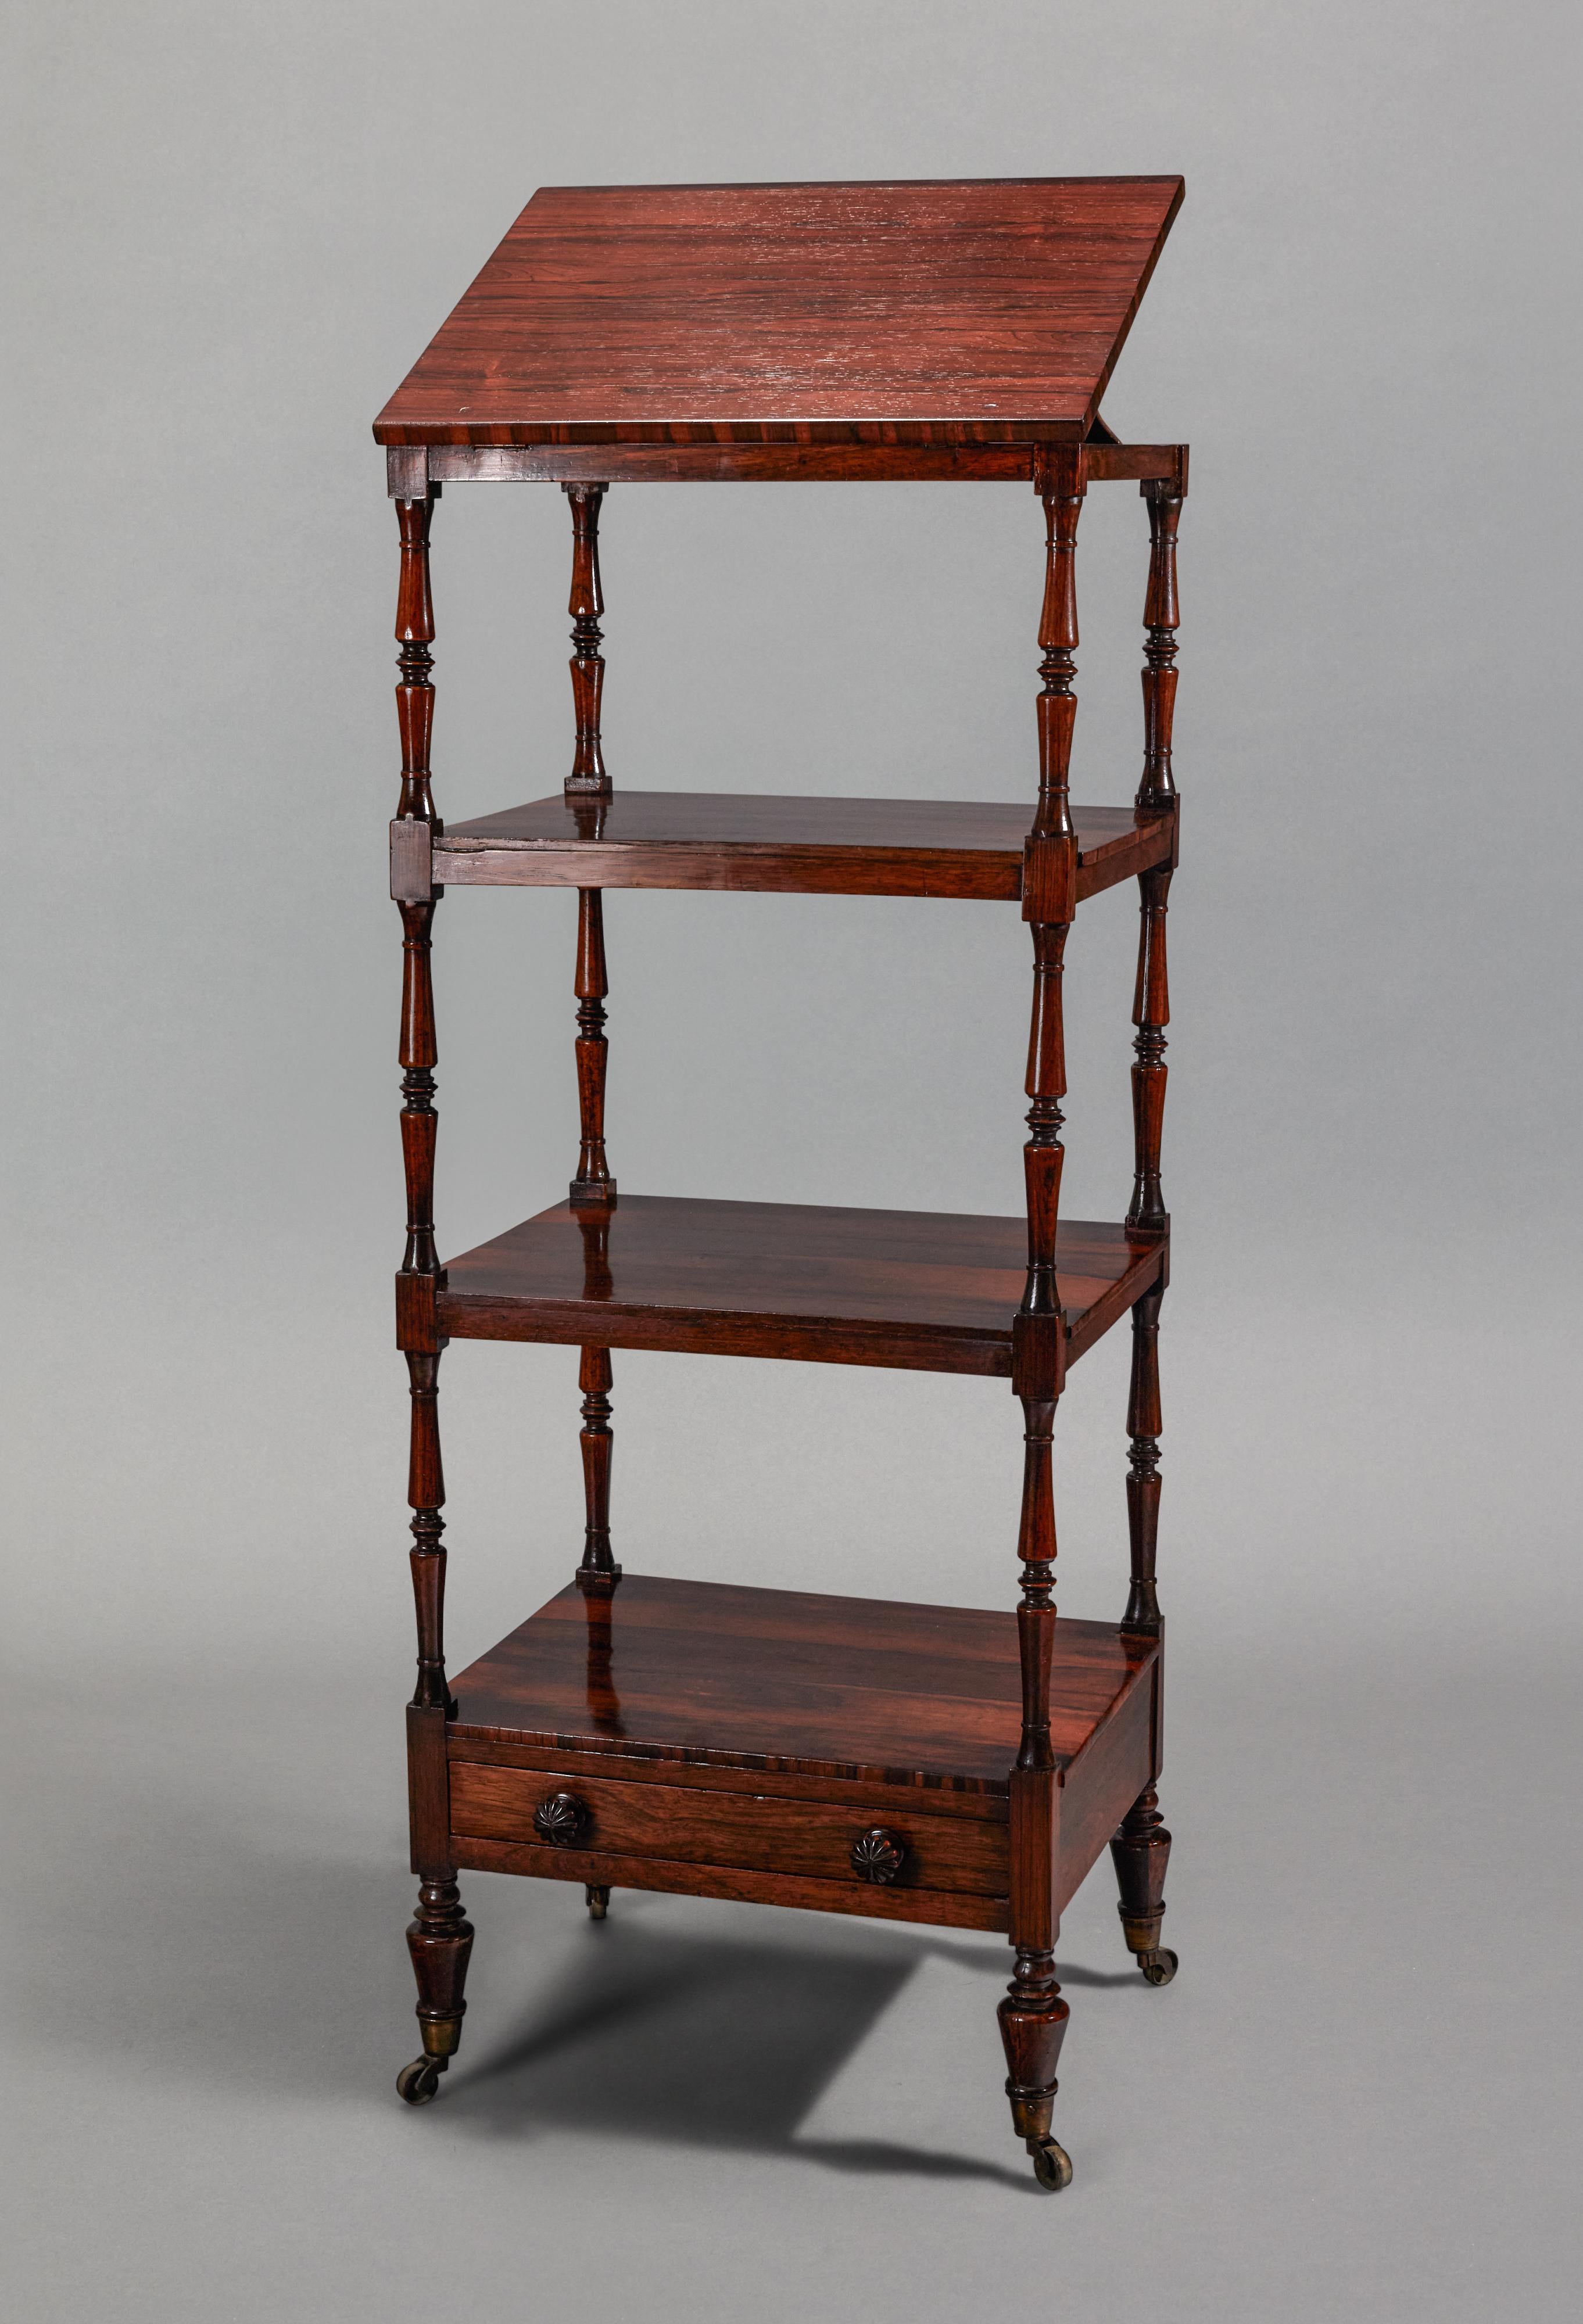 Regency Mahogany William IV Rosewood Four Tier Etagere For Sale 1